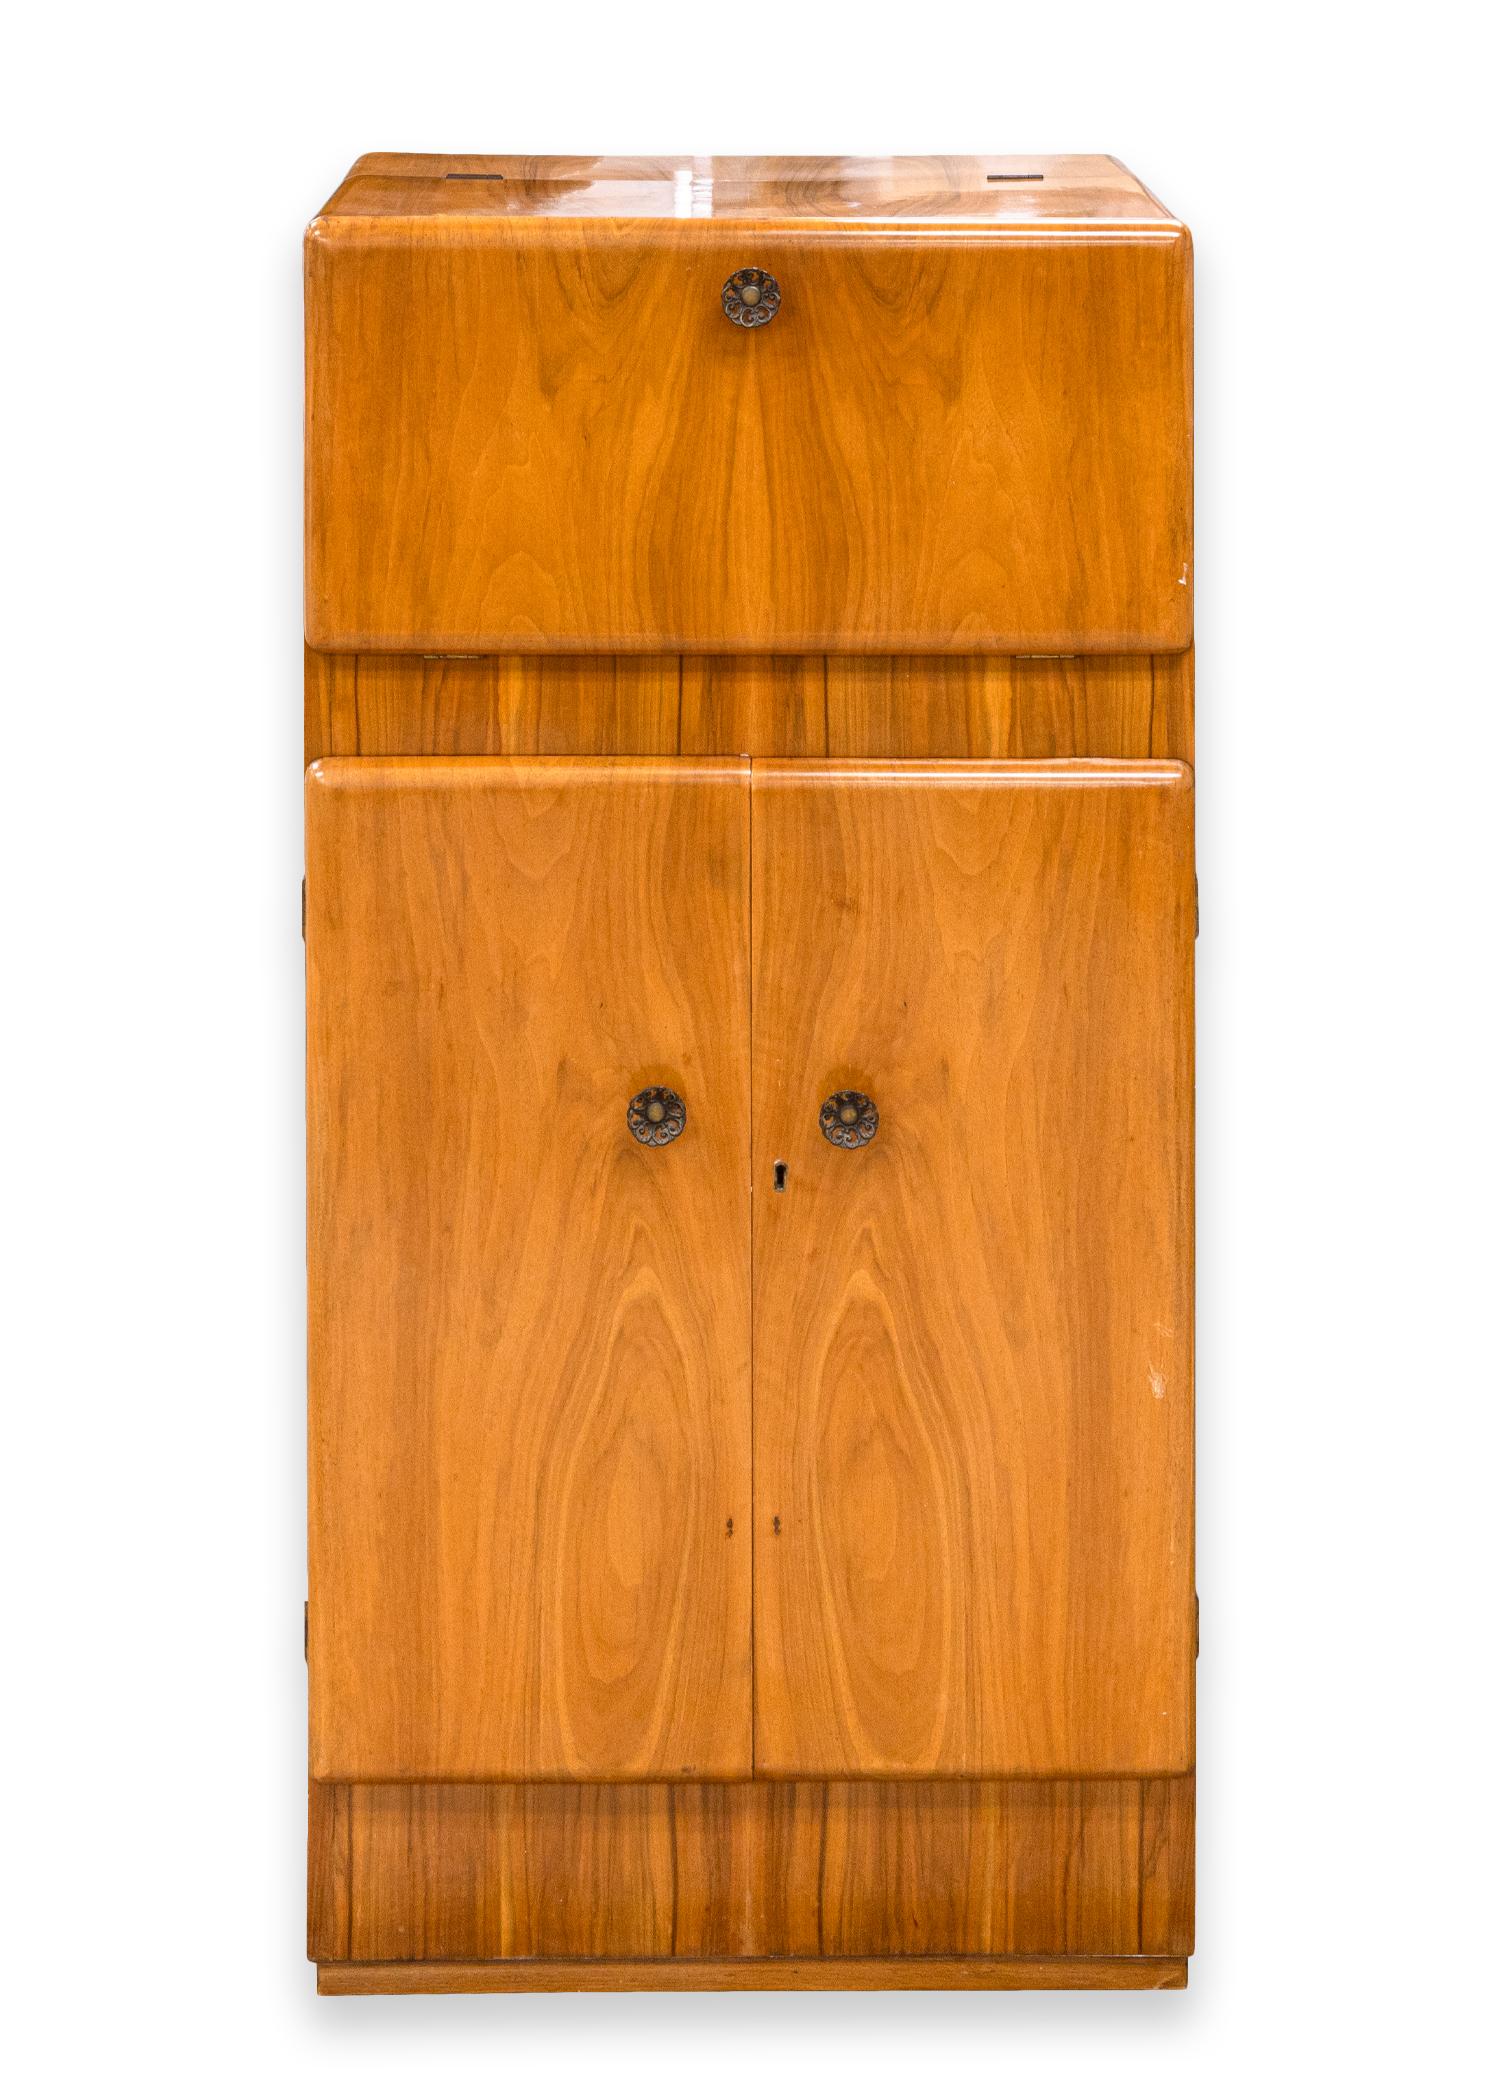 An art deco flip top dry bar. A beautiful piece from George Serlin for London based Sureline Furniture. This piece features a beautiful wood construction with a light wood color and gorgeous wood grain. The top cabient opens up and drops down to